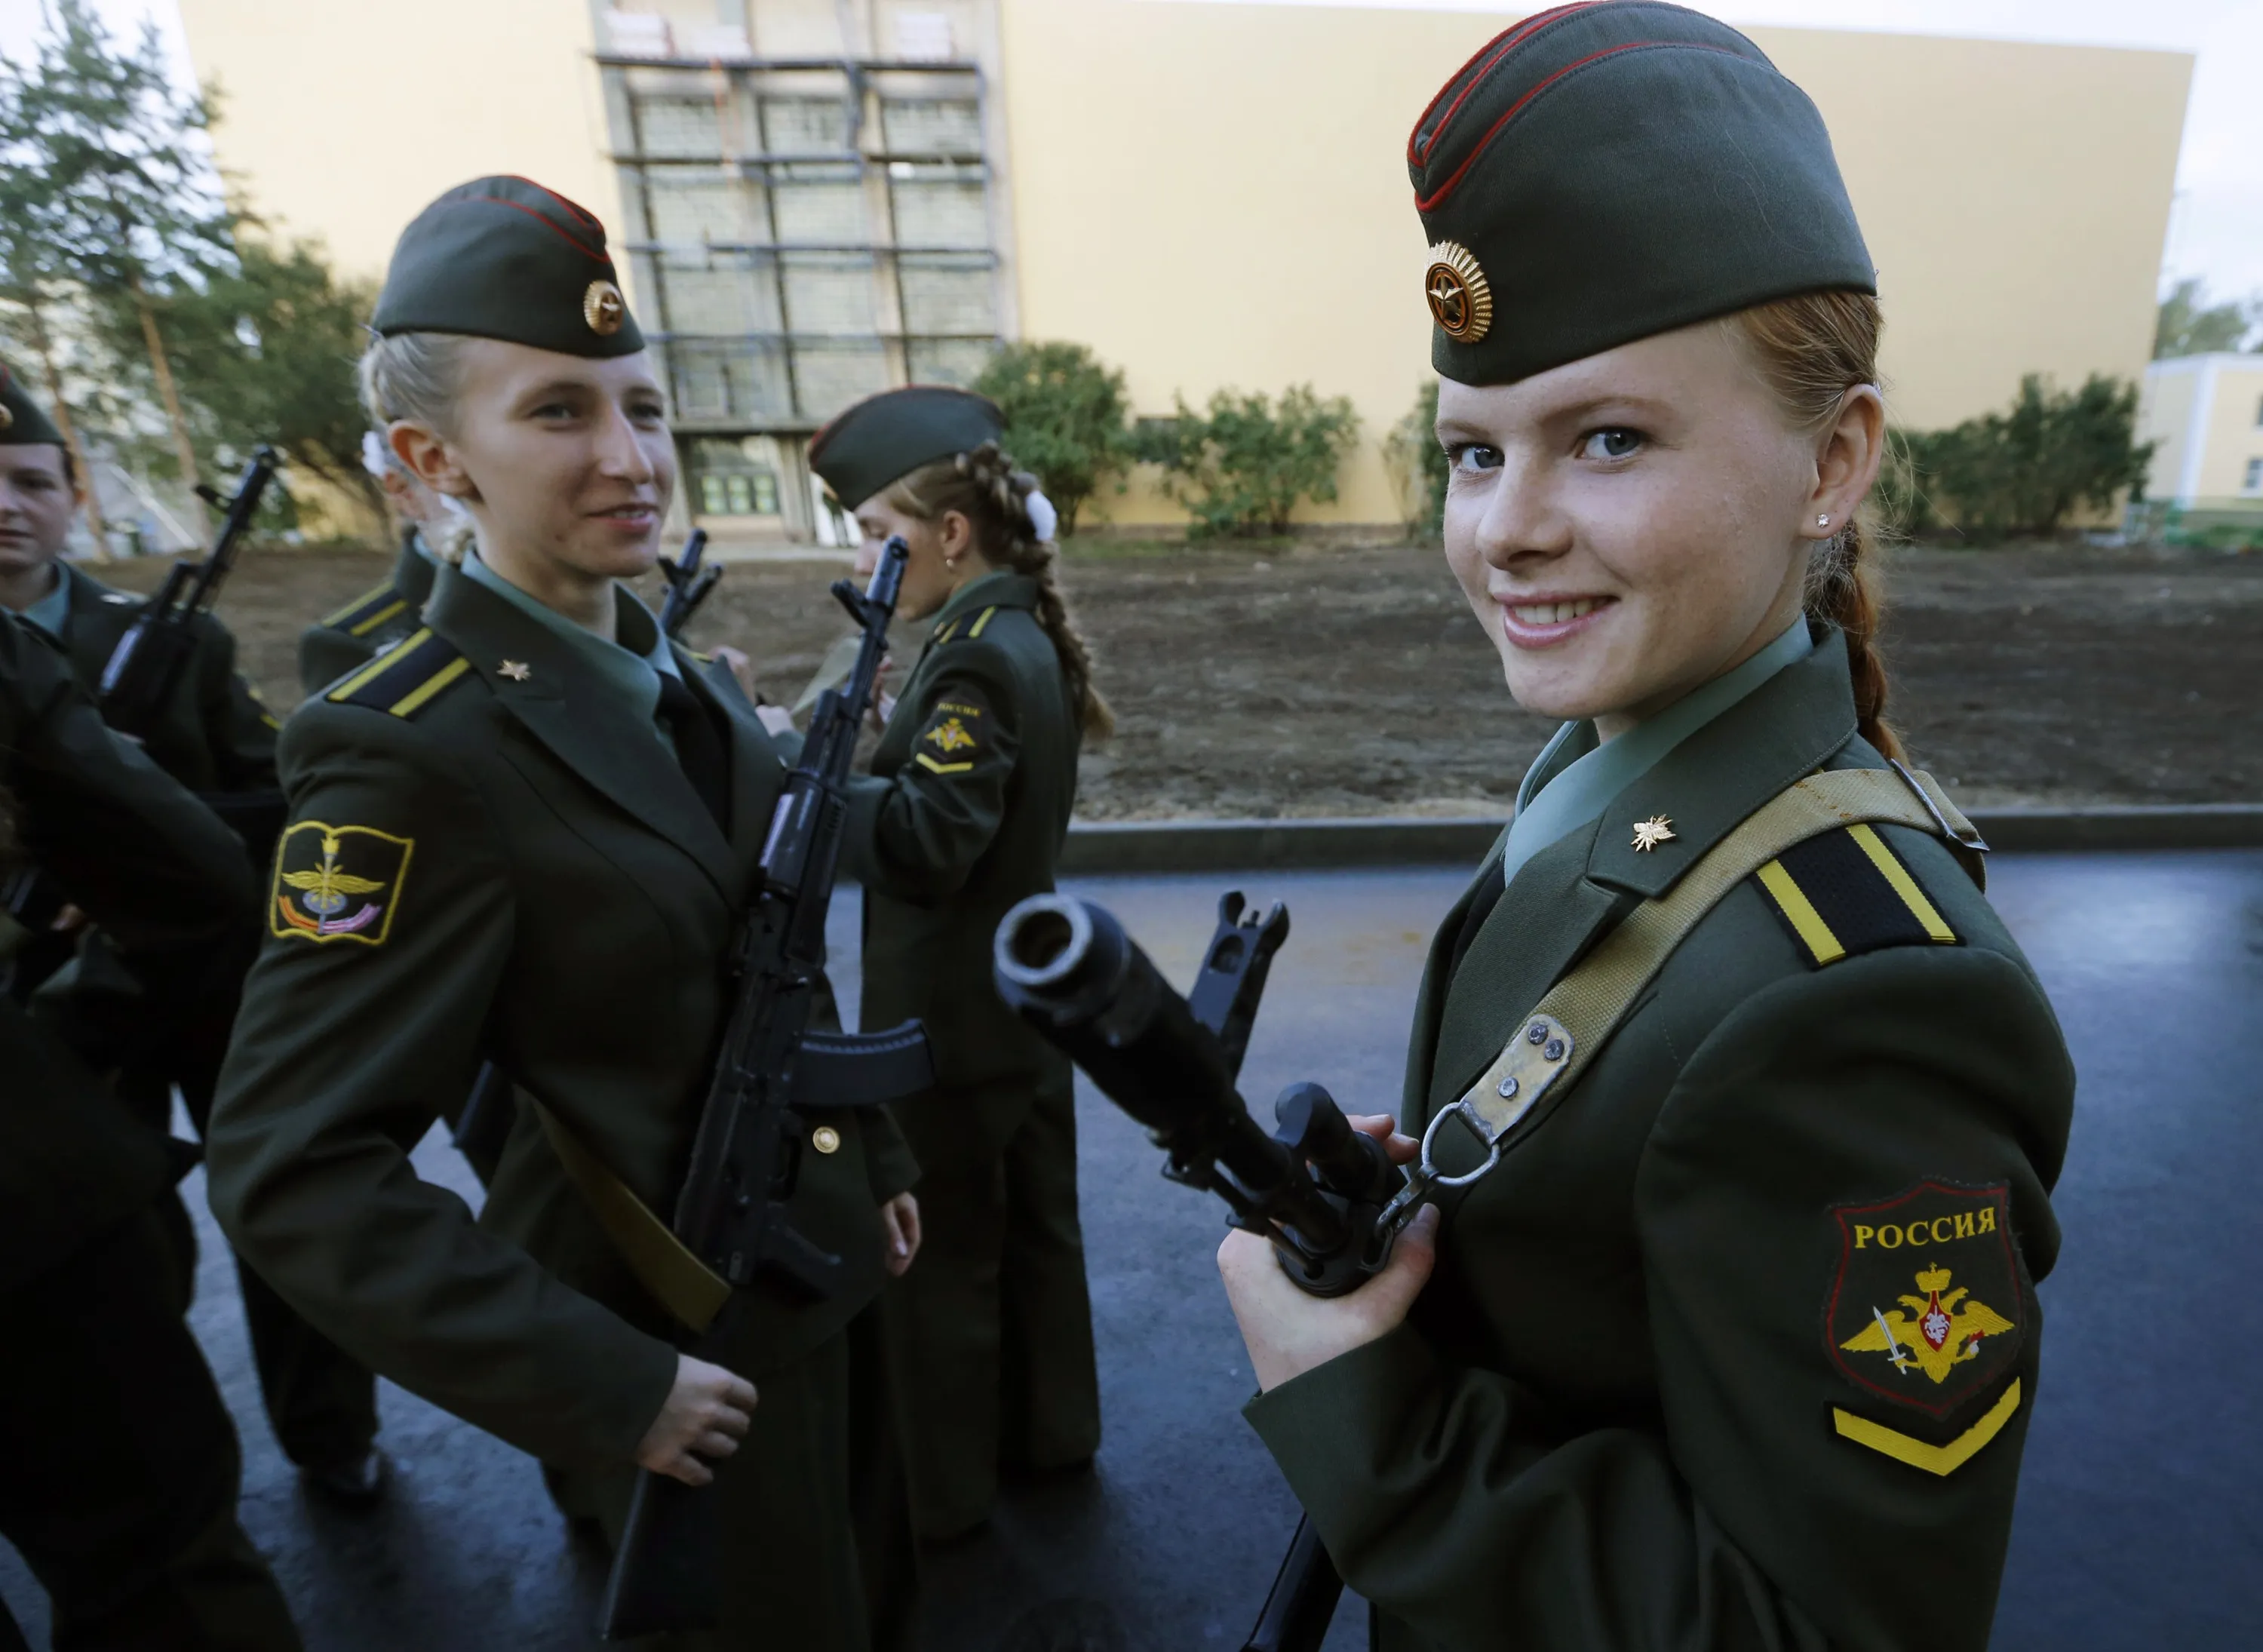 Russian Cadets During An Oath Taking Ceremony